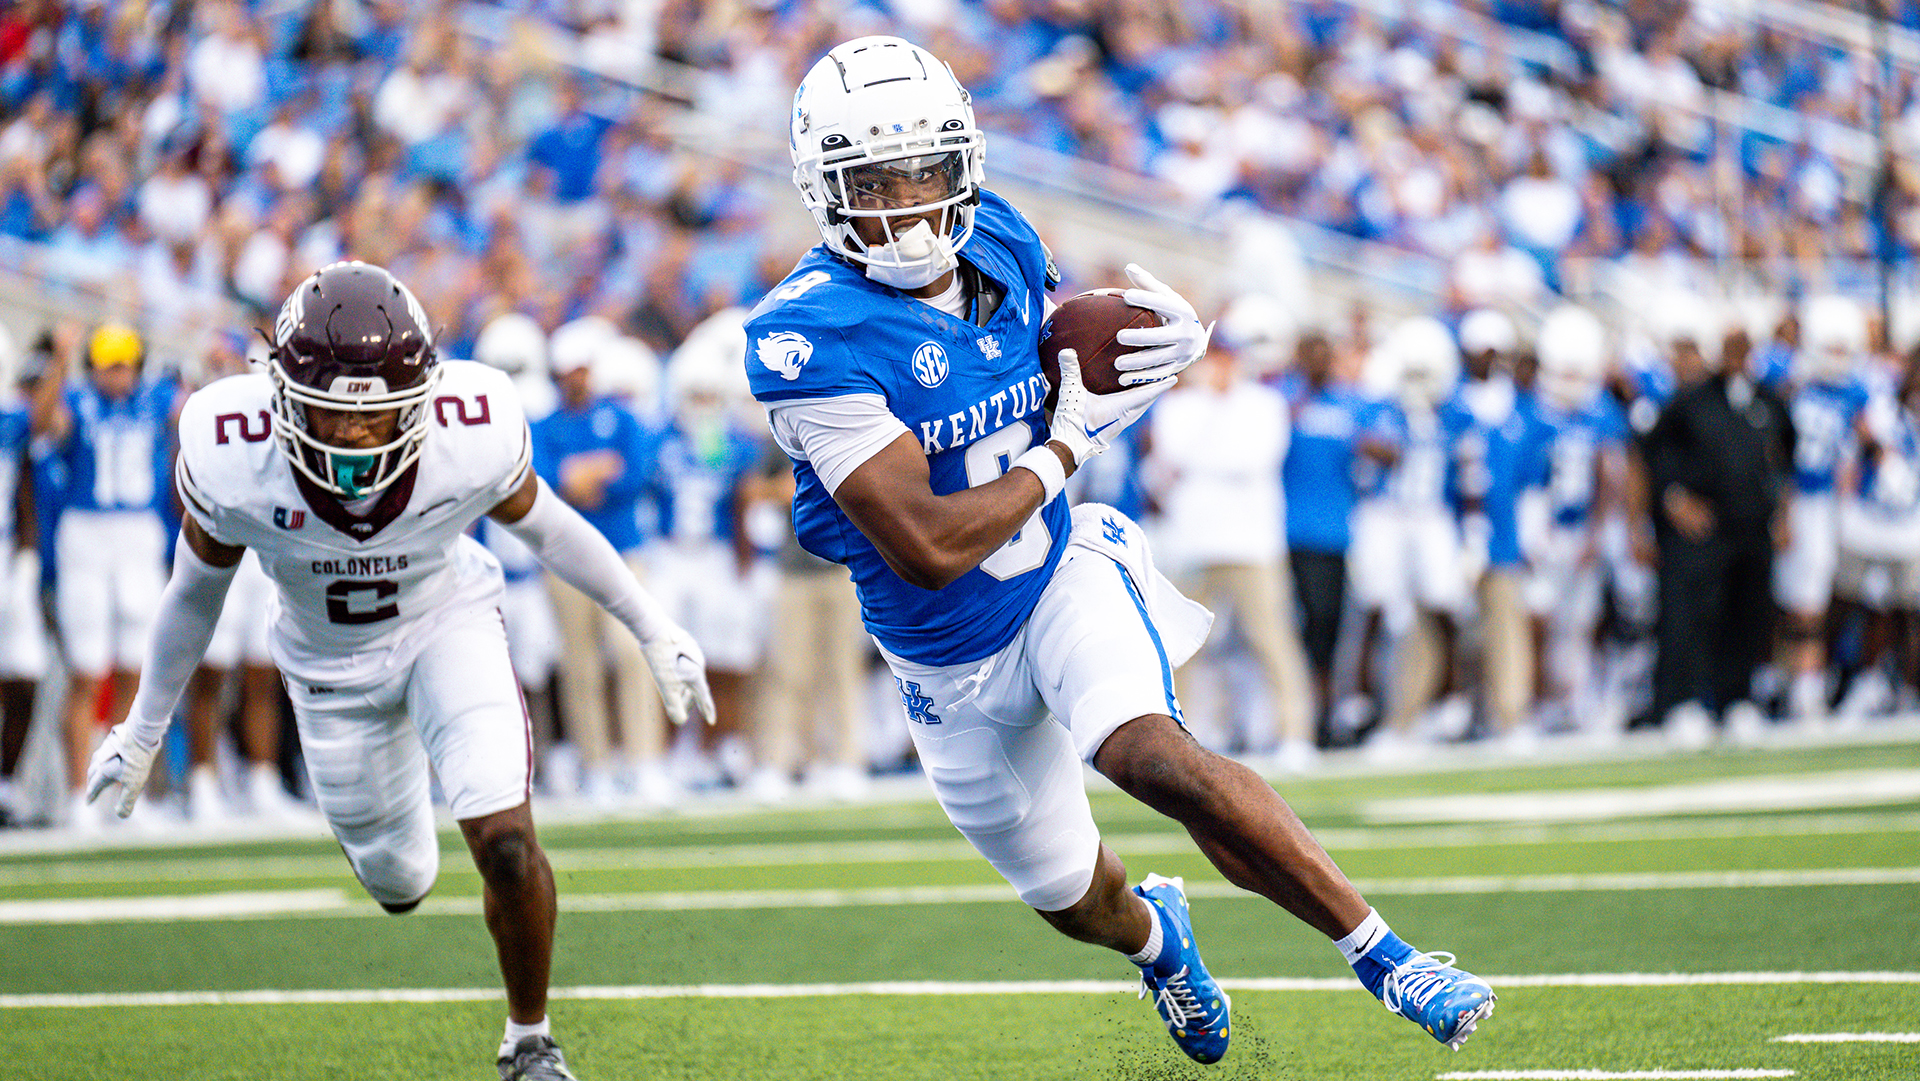 Big Plays by Brown, Robinson Help Cats Get Past Colonels